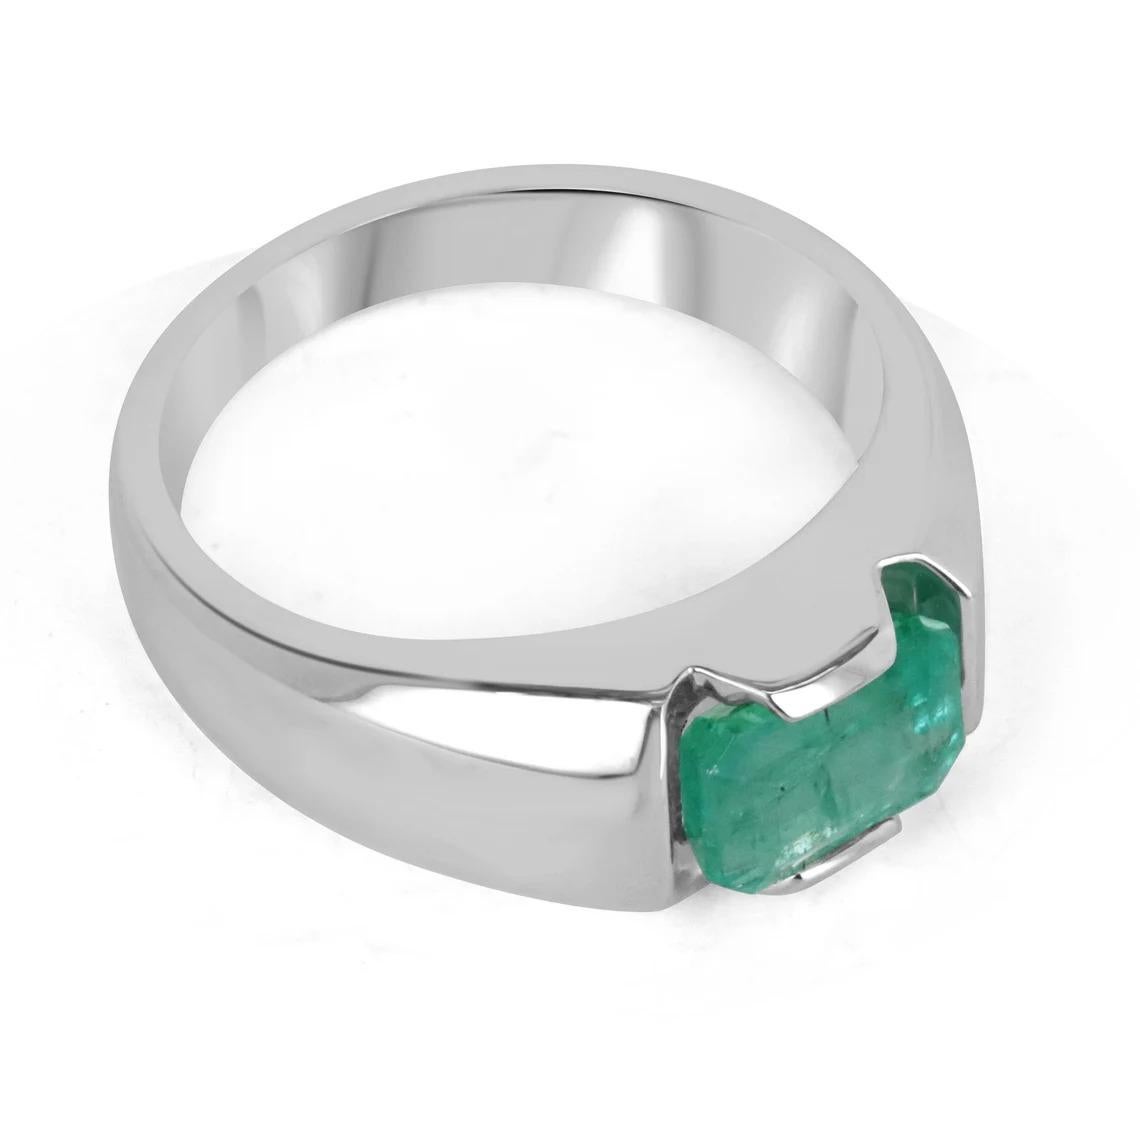 A dapper natural emerald-emerald cut solitaire ring. This exquisite piece features a perfectly imperfect emerald cut emerald from the mines of Zambia. The gemstone showcases a beautiful shine, mossy medium green color, and very good luster. Natural